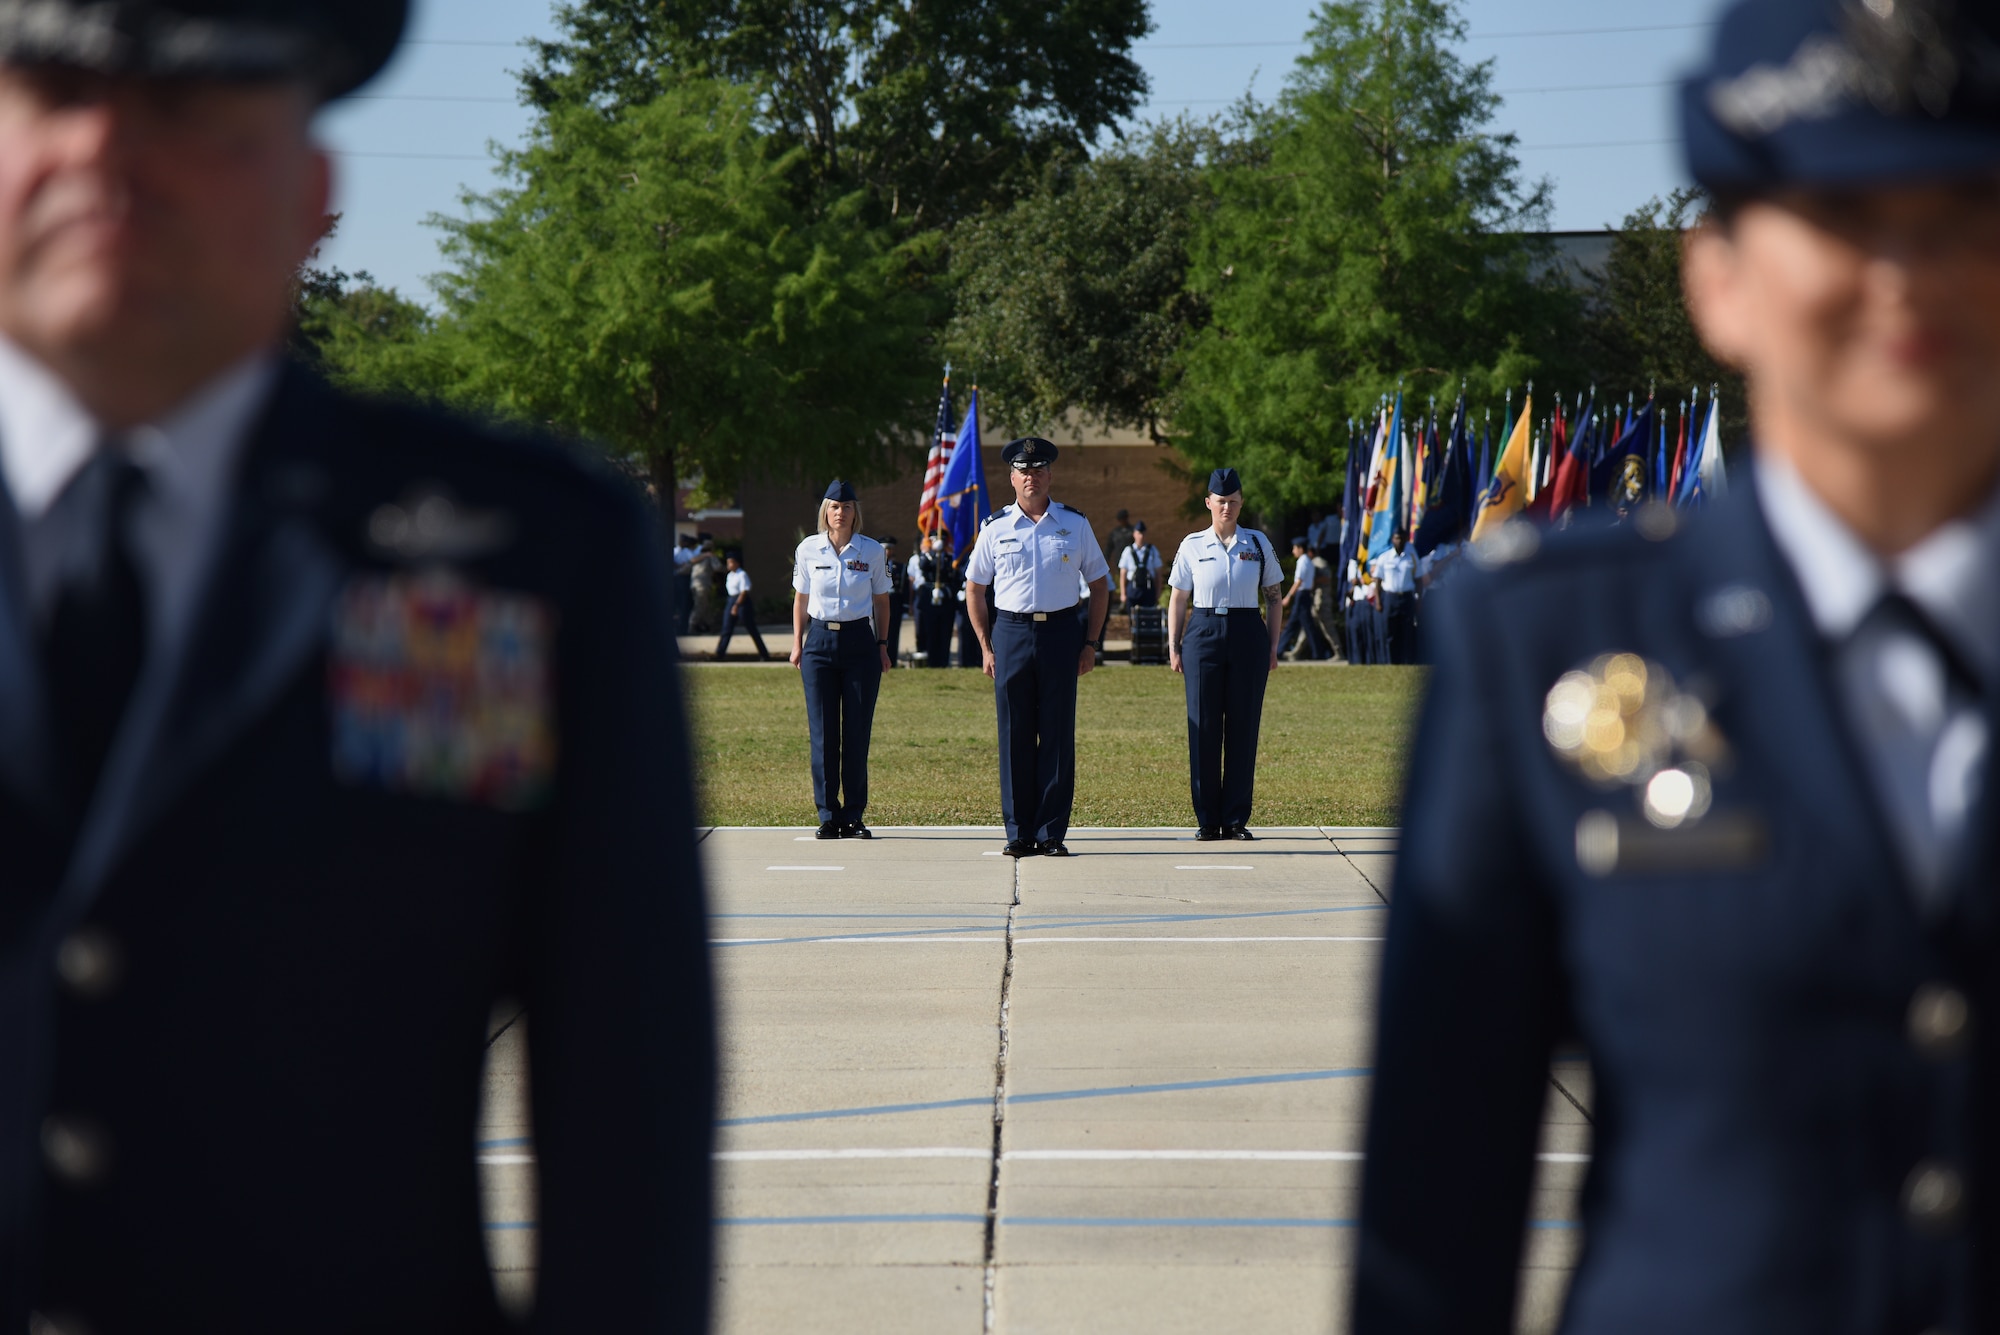 Keesler leadership stand at attention during the 81st Training Wing change of command ceremony on the Levitow Training Support Facility drill pad at Keesler Air Force Base, Mississippi, May 16, 2019. The ceremony is a symbol of command being exchanged from one commander to the next by the handing-off of a ceremonial guidon. U.S. Air Force Col. Debra Lovette, relinquished command of the 81st TRW to Col. Heather Blackwell. (U.S. Air Force photo by Kemberly Groue)